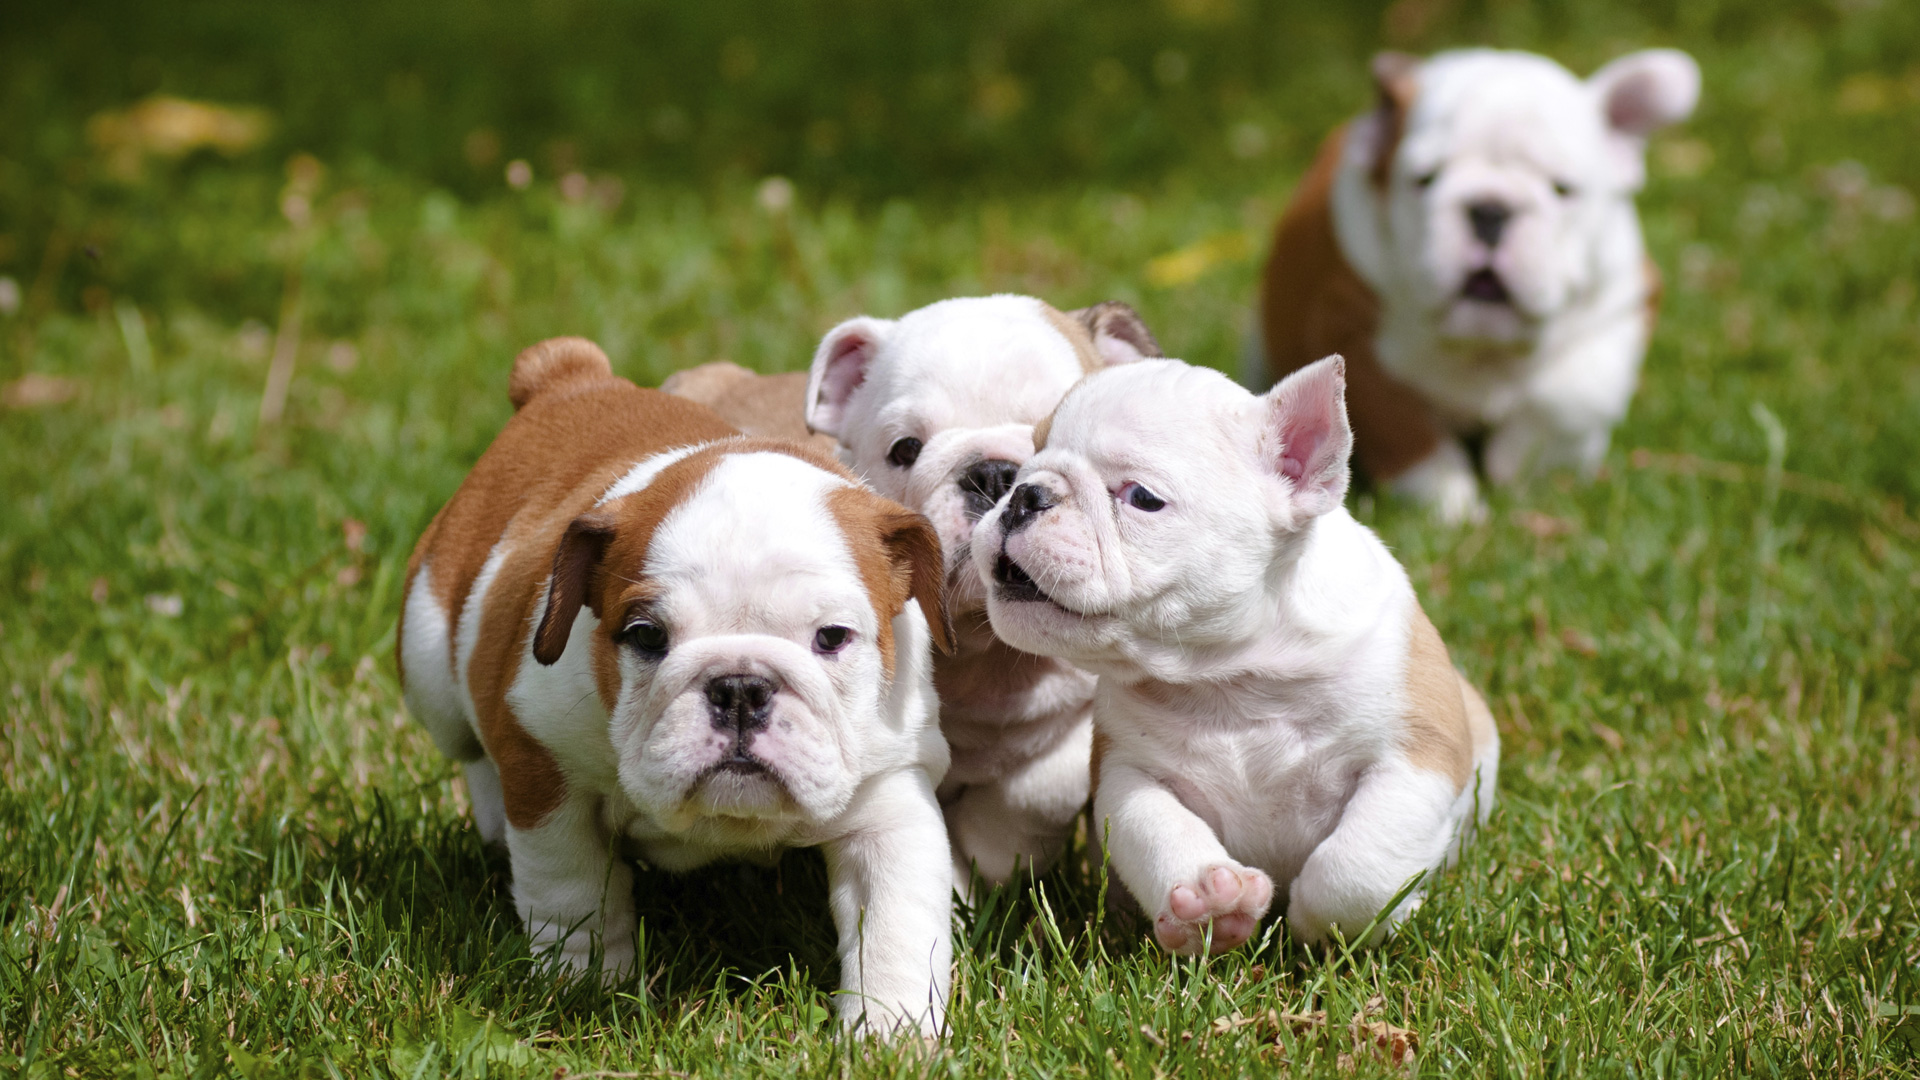 10 Reasons why English Bulldog puppies are the cutest 